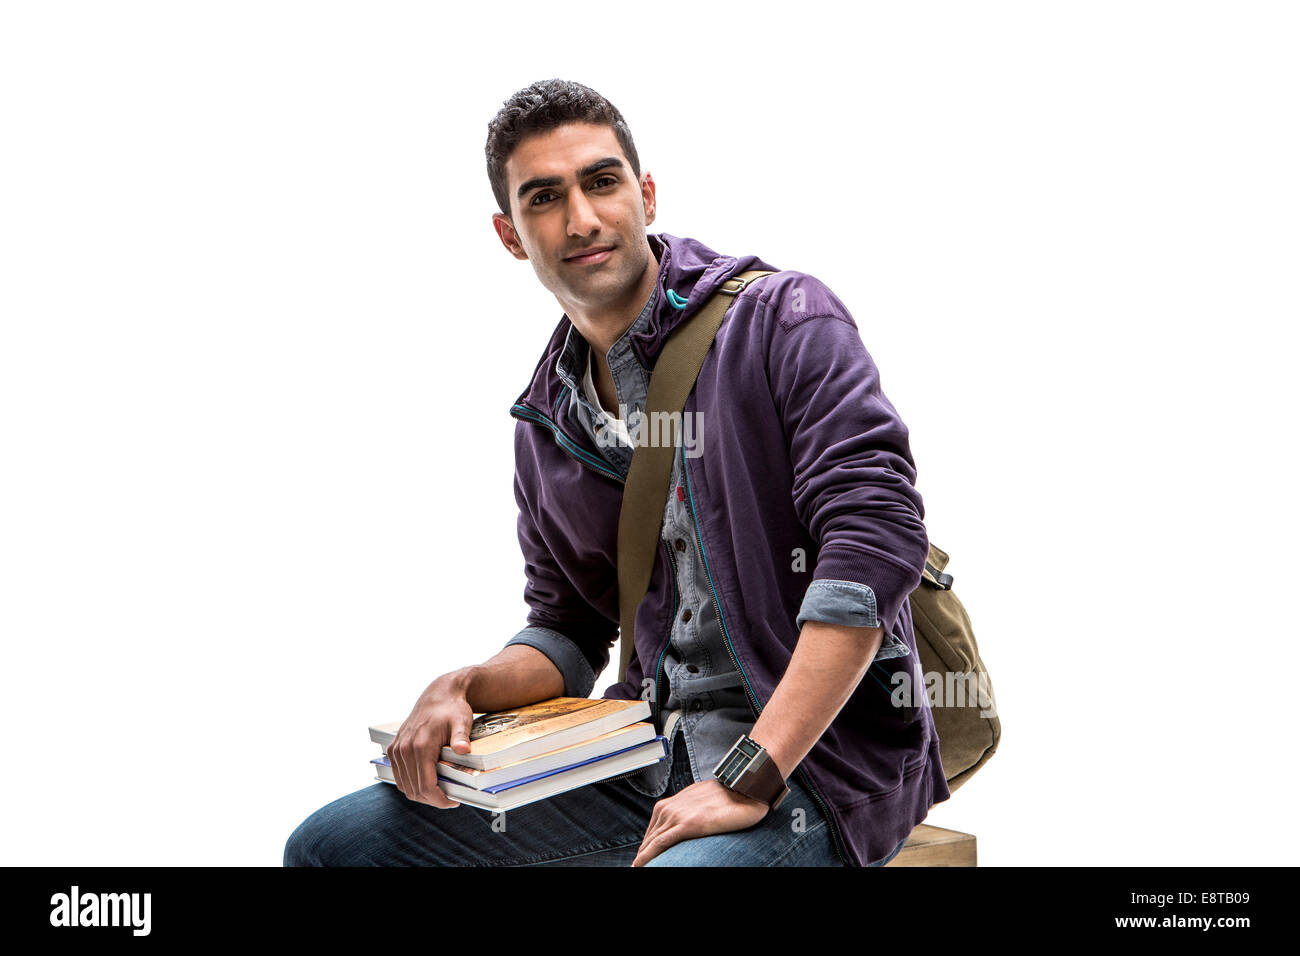 Indian student holding stack of books Stock Photo